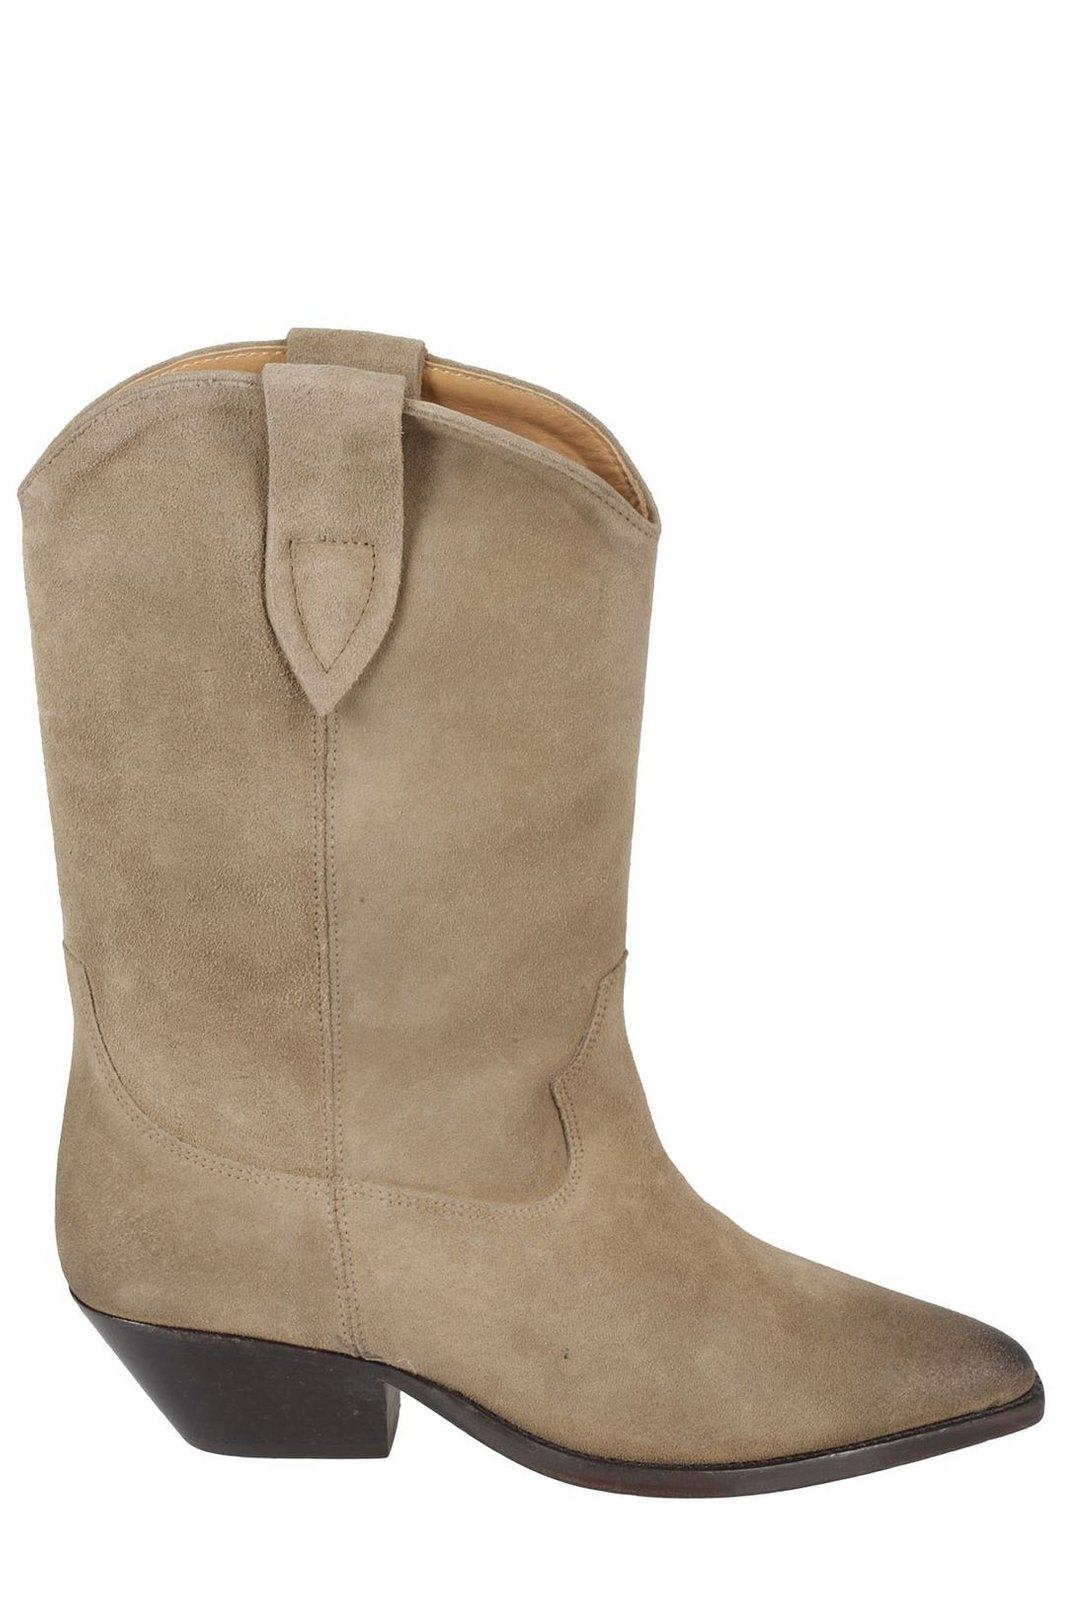 ISABEL MARANT POINTED-TOE BOOTS